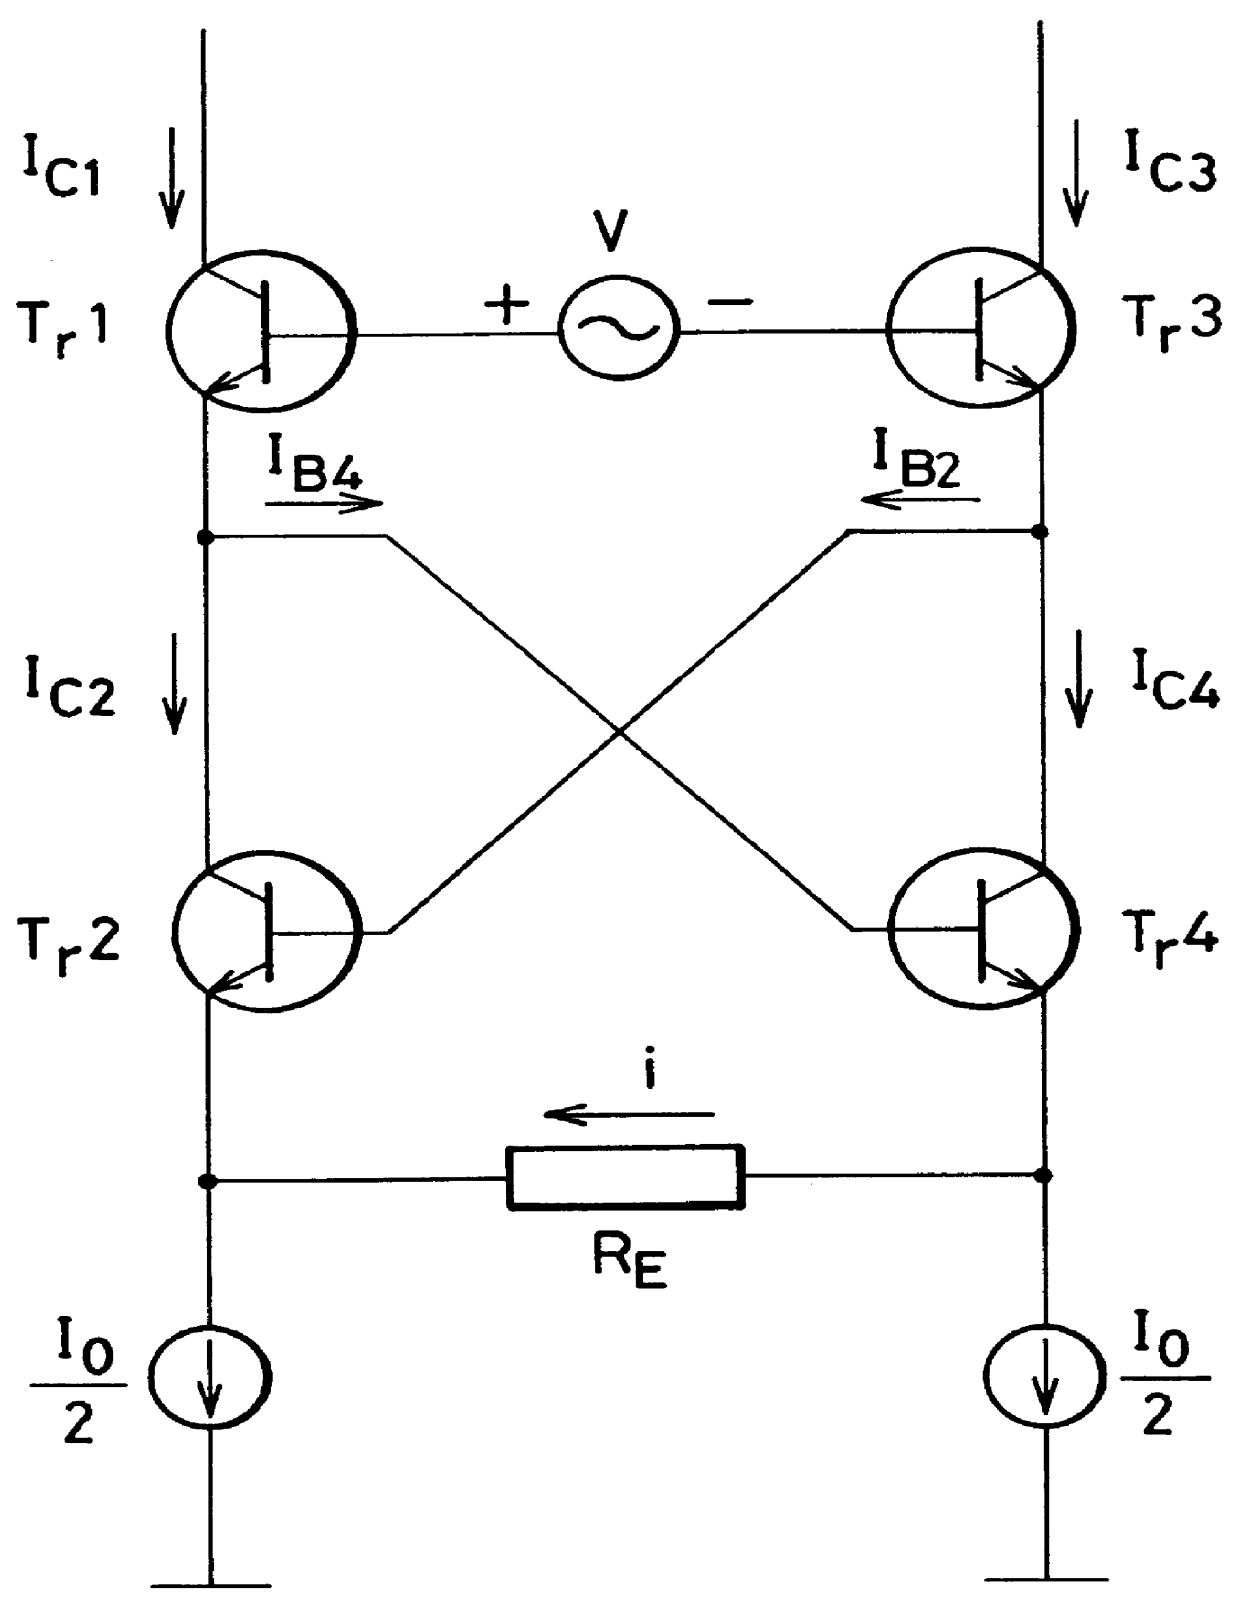 Operational transconductance amplifier and multiplier